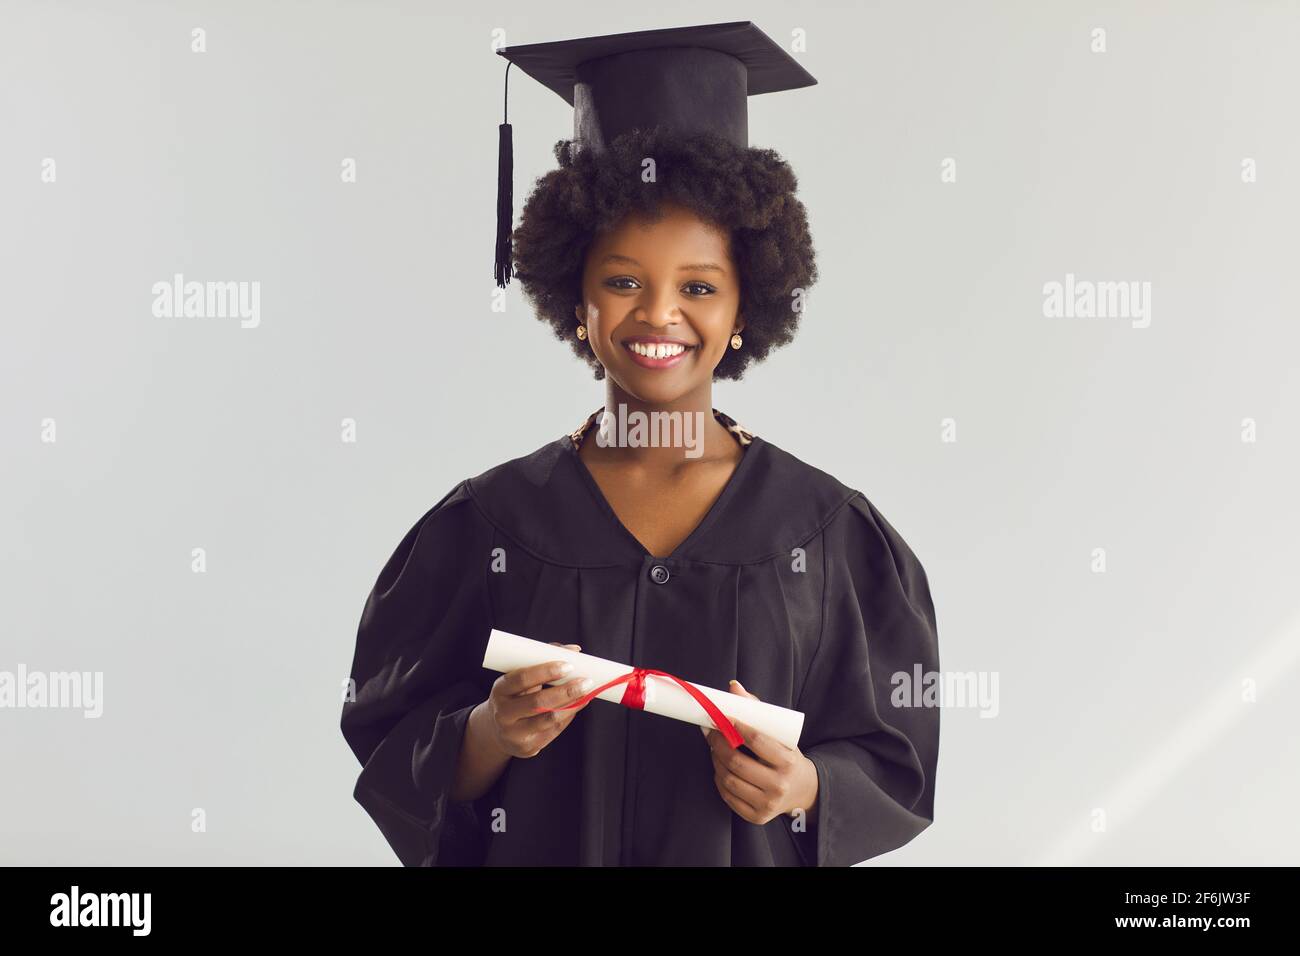 African american woman in academic hat and gown with diploma studio headshot Stock Photo